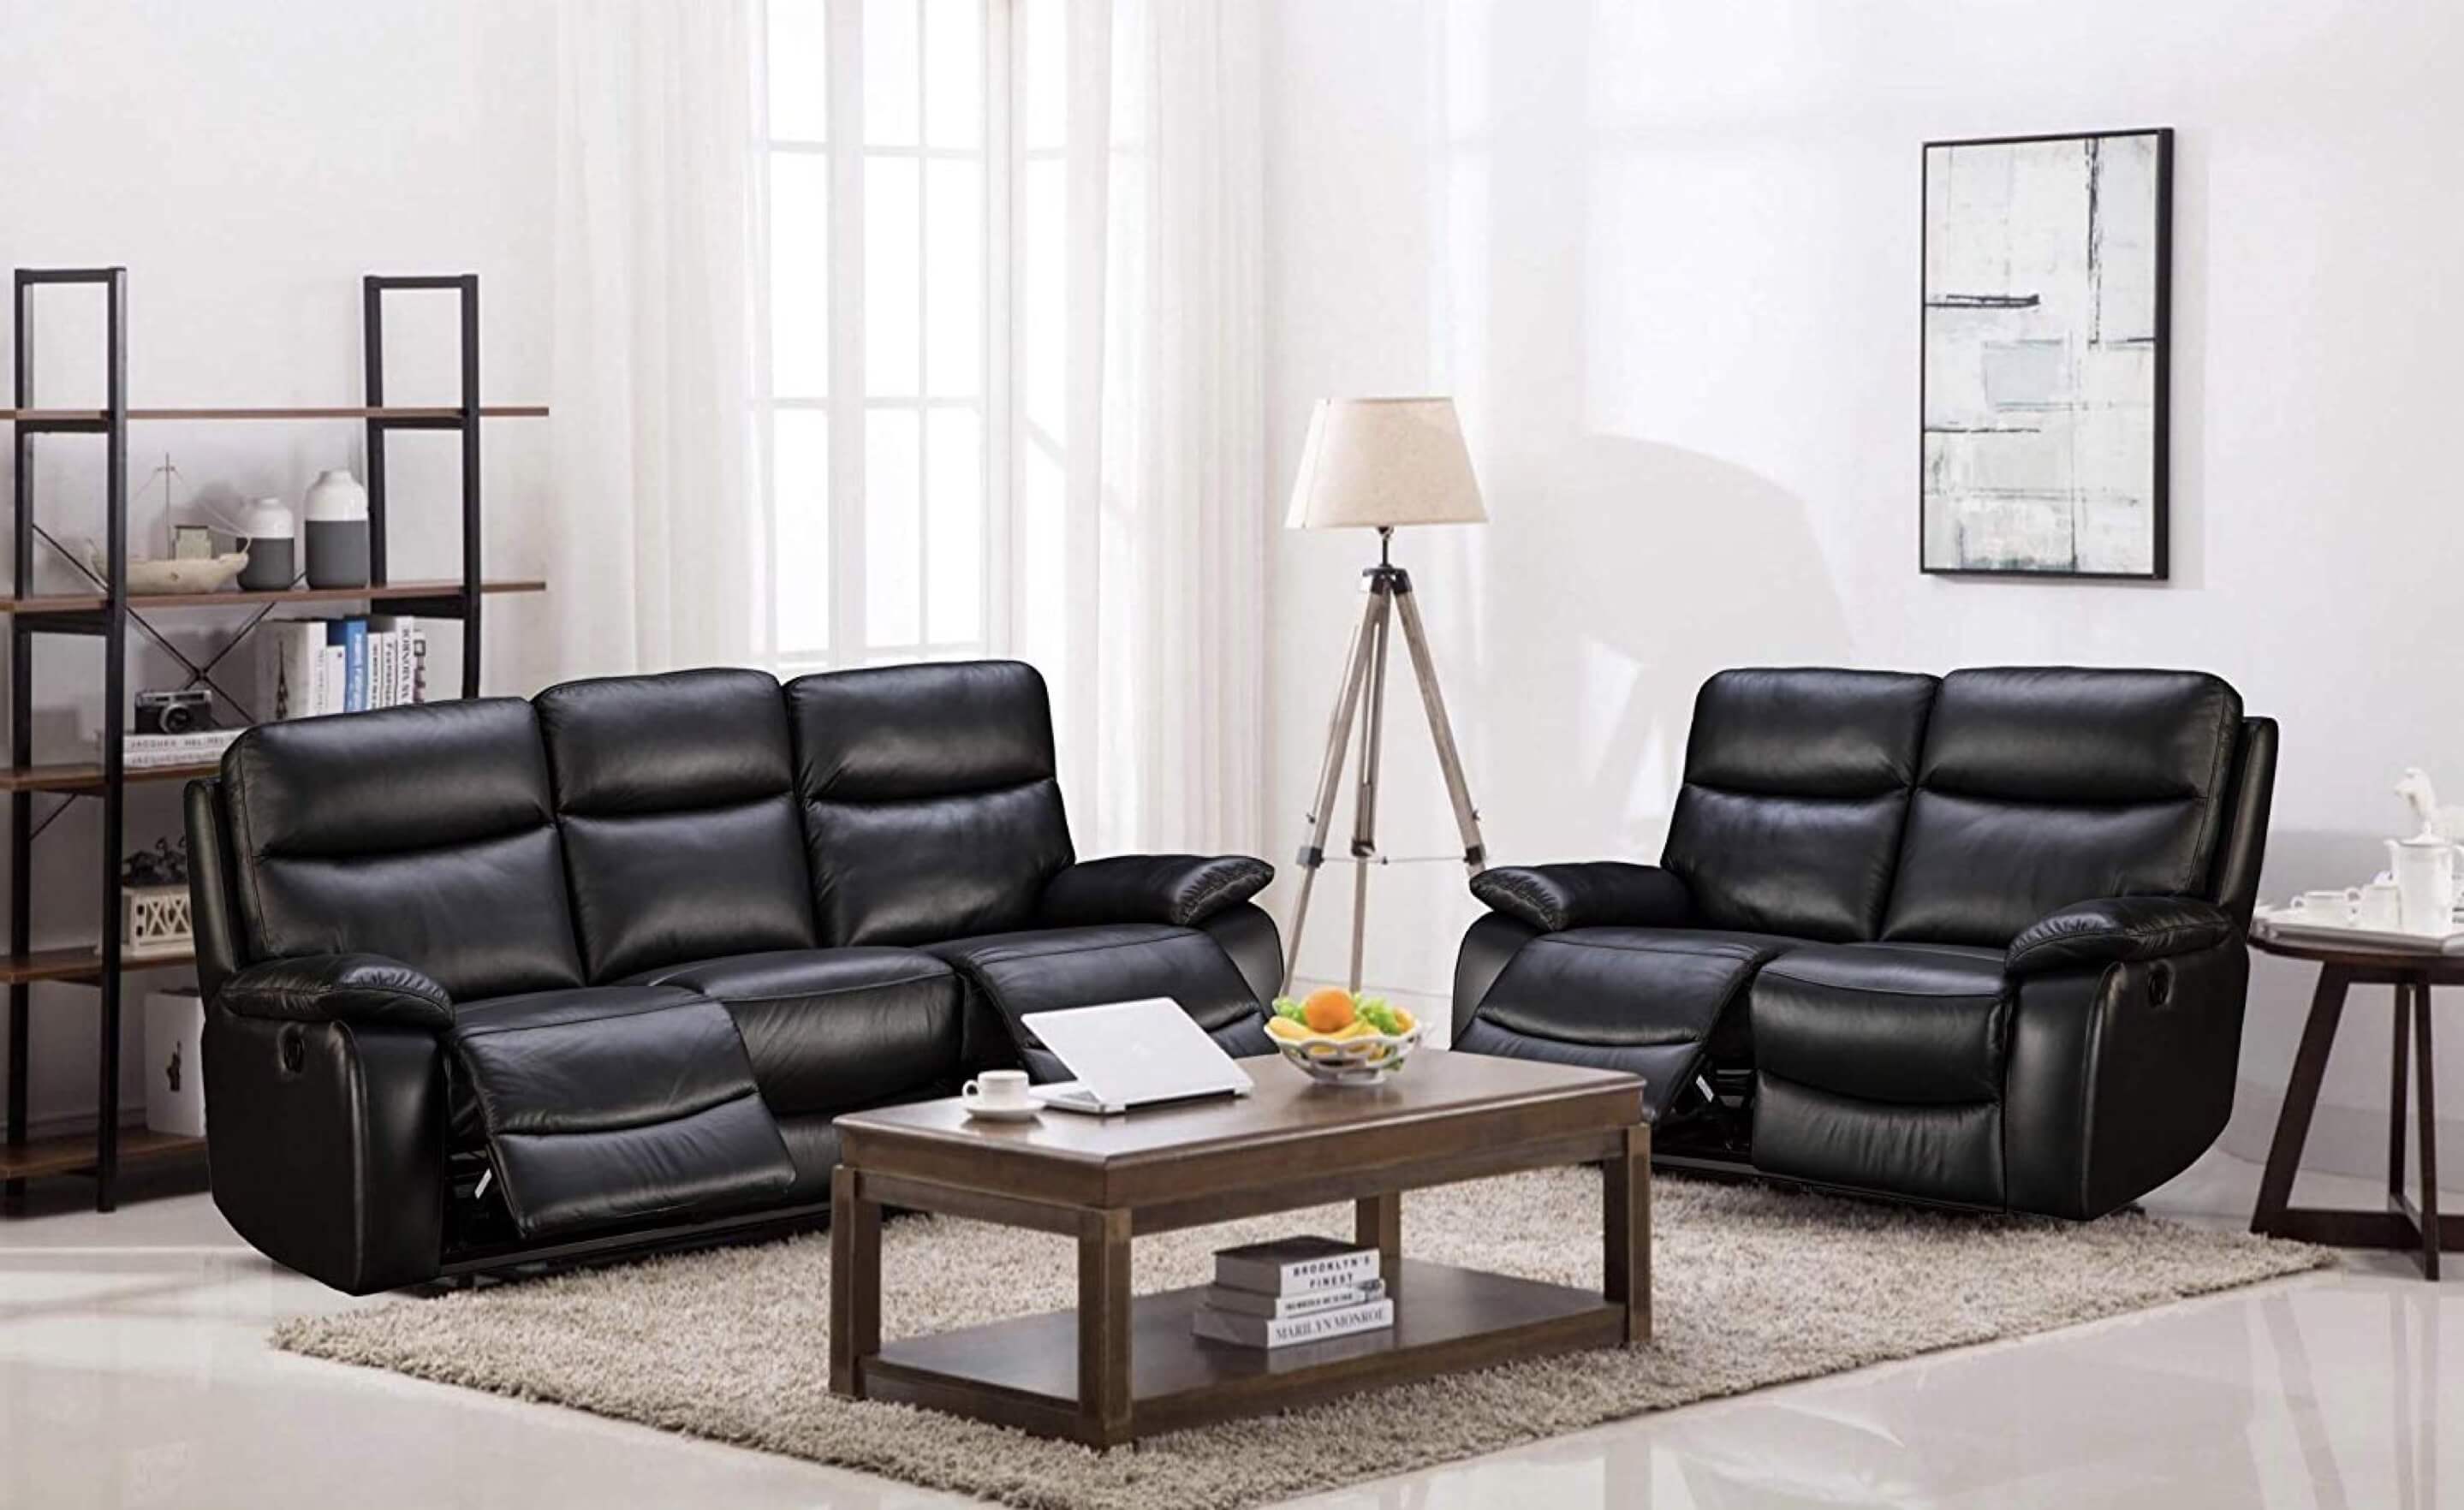 A comfortable, leather black sofa in a trendy living room.